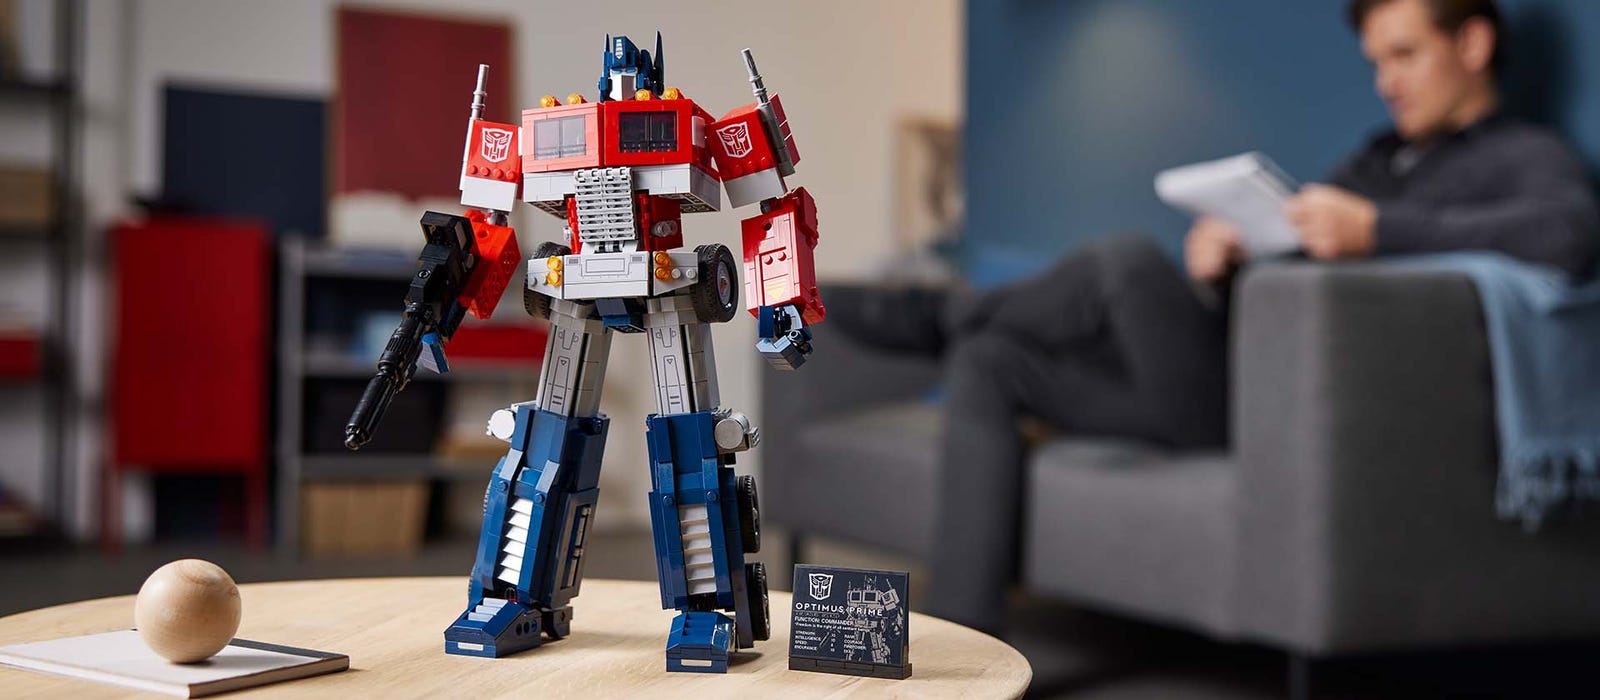 LEGO Transformers Optimus Prime is 50% Off at Argos Right Now - IGN